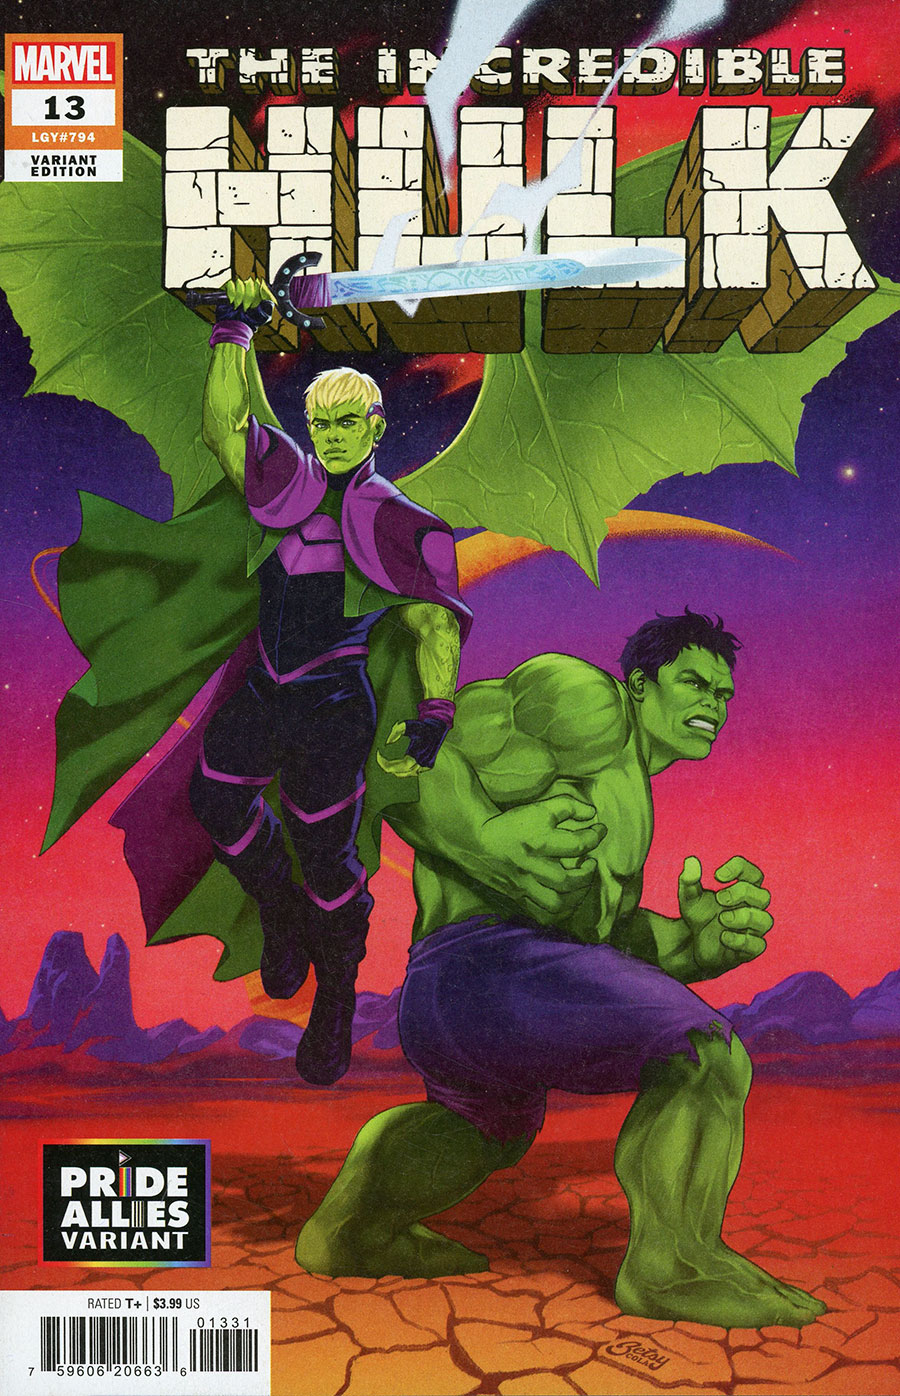 Incredible Hulk Vol 5 #13 Cover C Variant Betsy Cola Pride Allies Cover